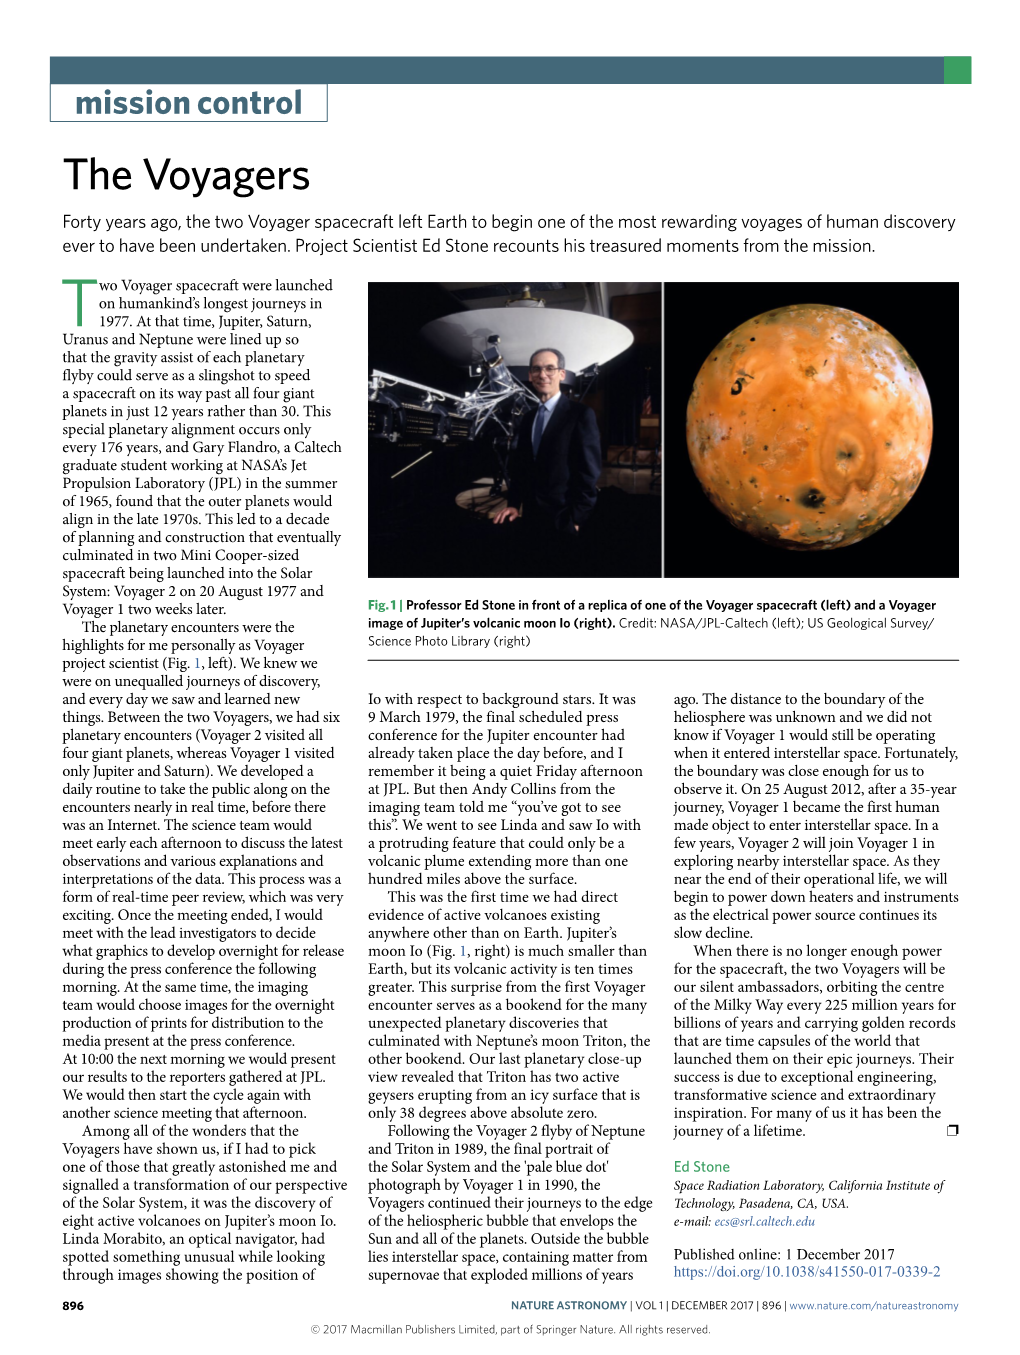 The Voyagers Forty Years Ago, the Two Voyager Spacecraft Left Earth to Begin One of the Most Rewarding Voyages of Human Discovery Ever to Have Been Undertaken